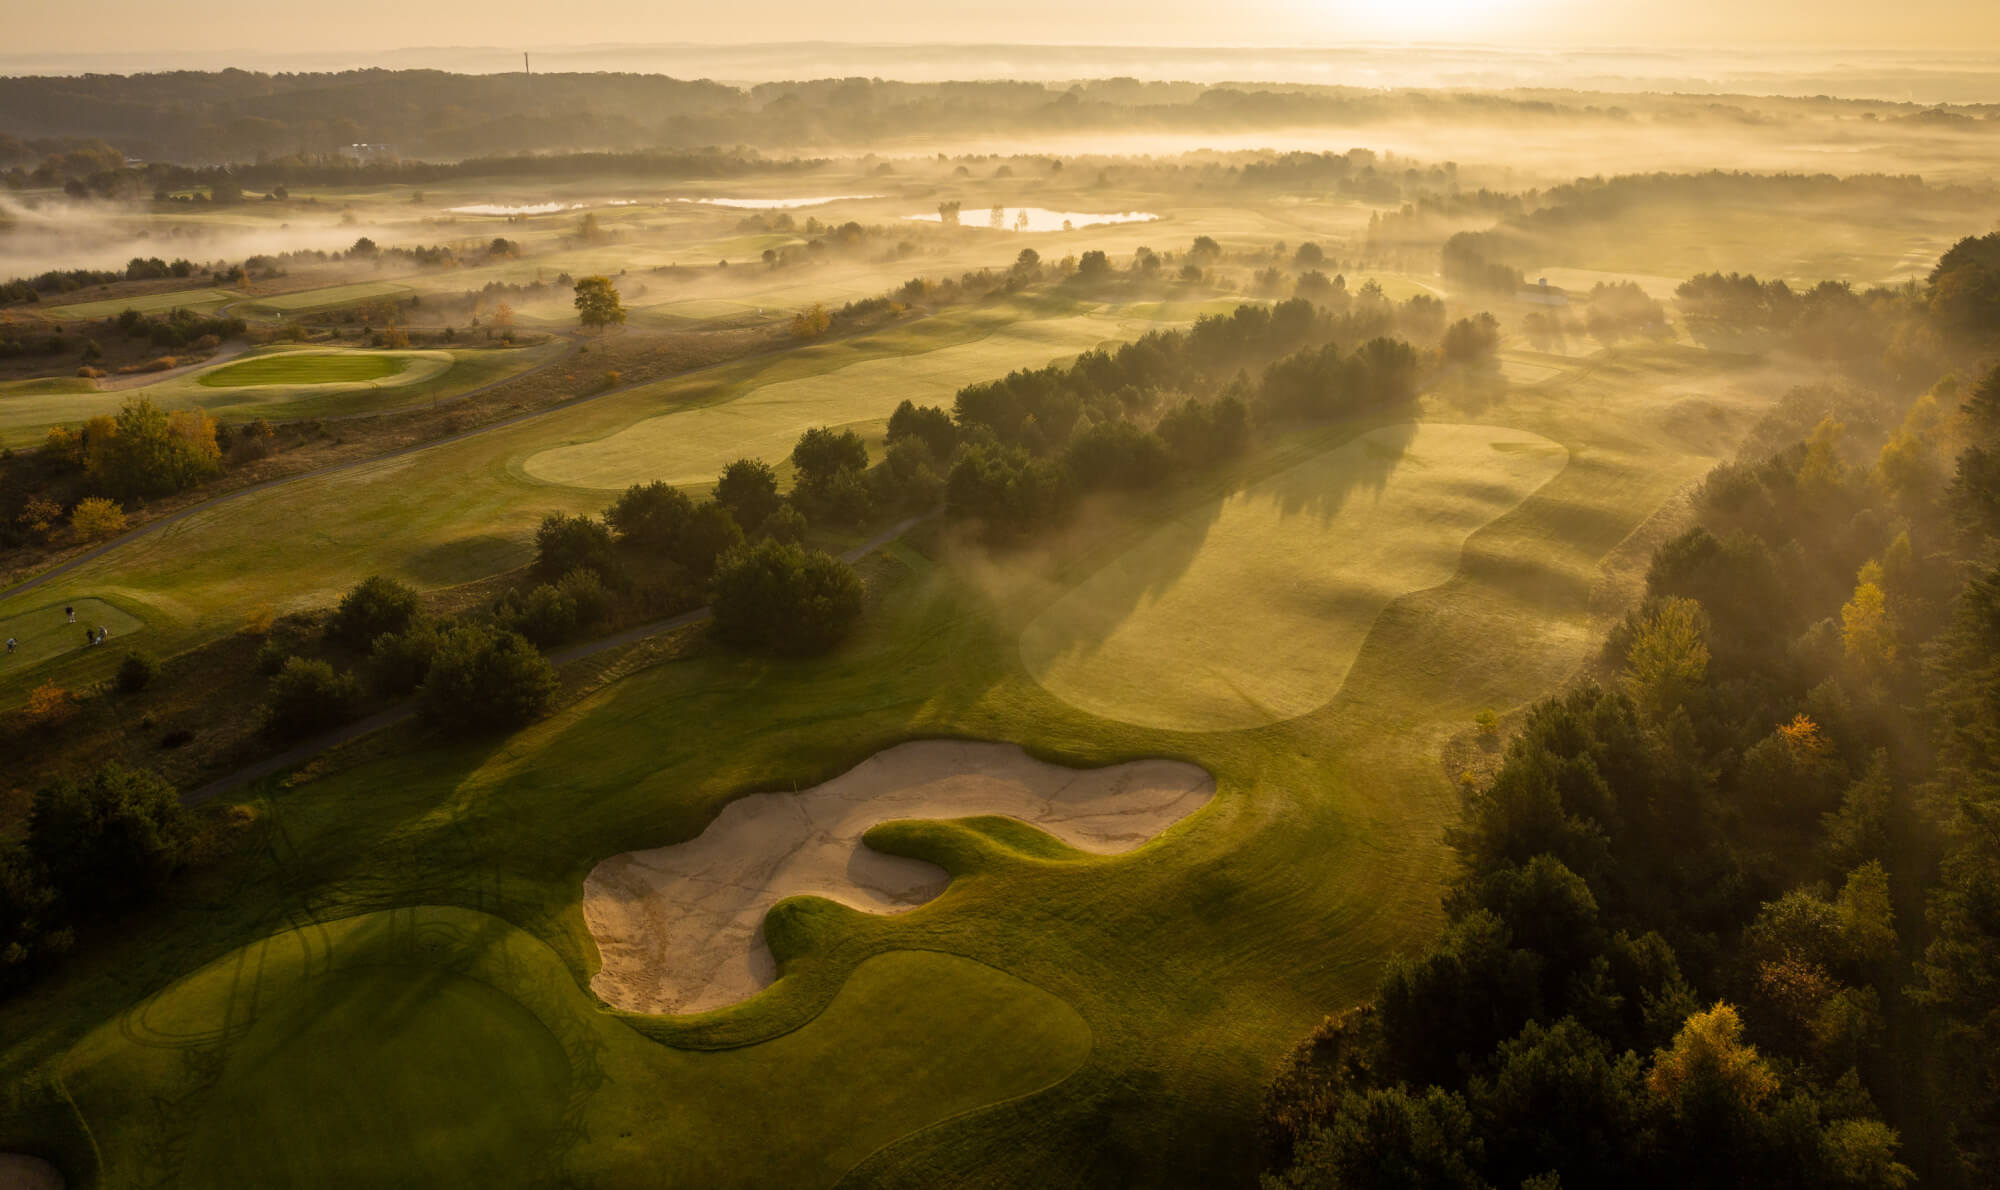 Discover Berlin and this fantastic golf resort just outside the city!